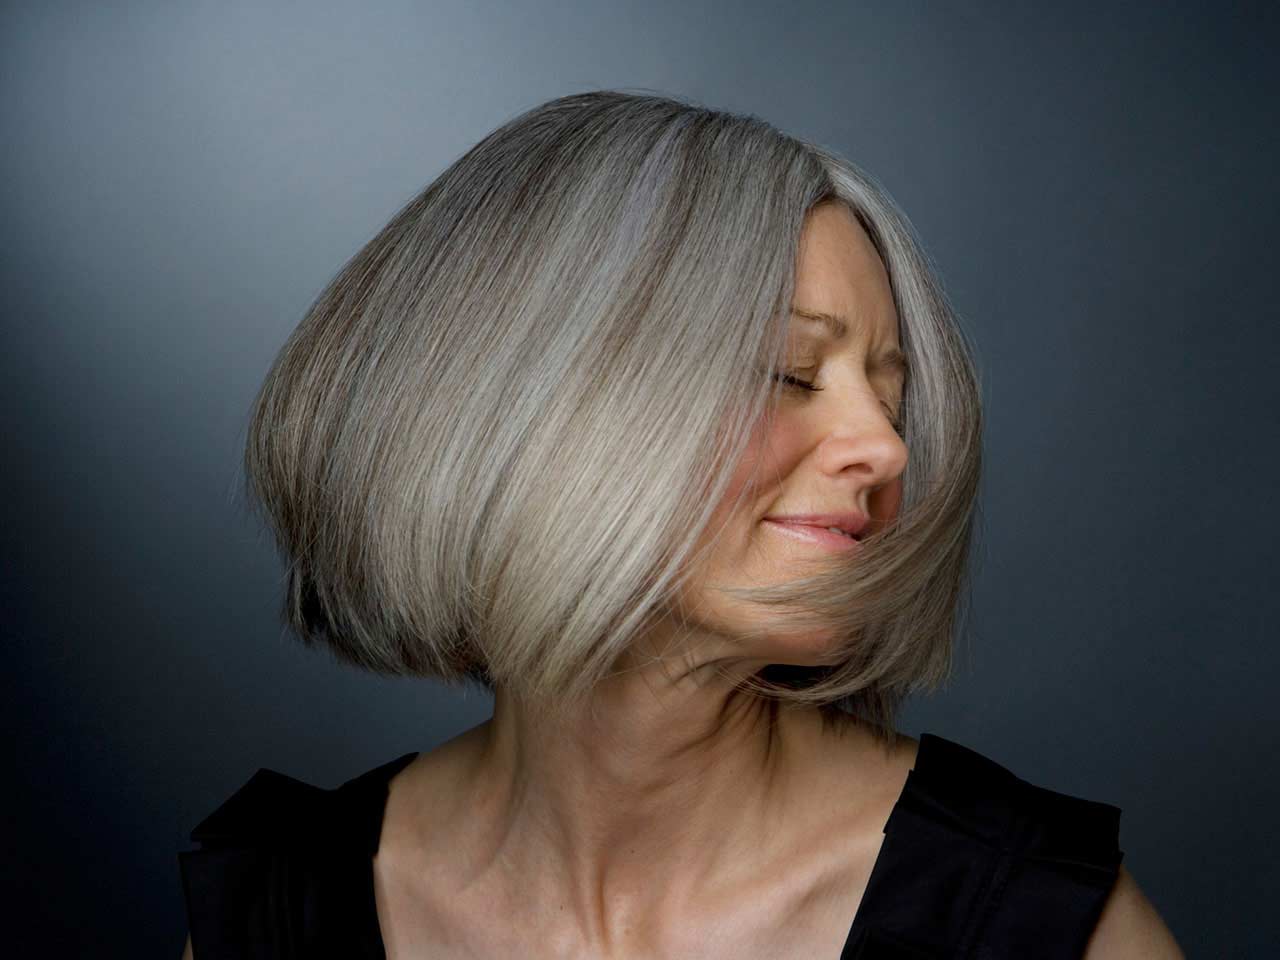 Hair for middle-aged women  Why women cut their hair at a certain age